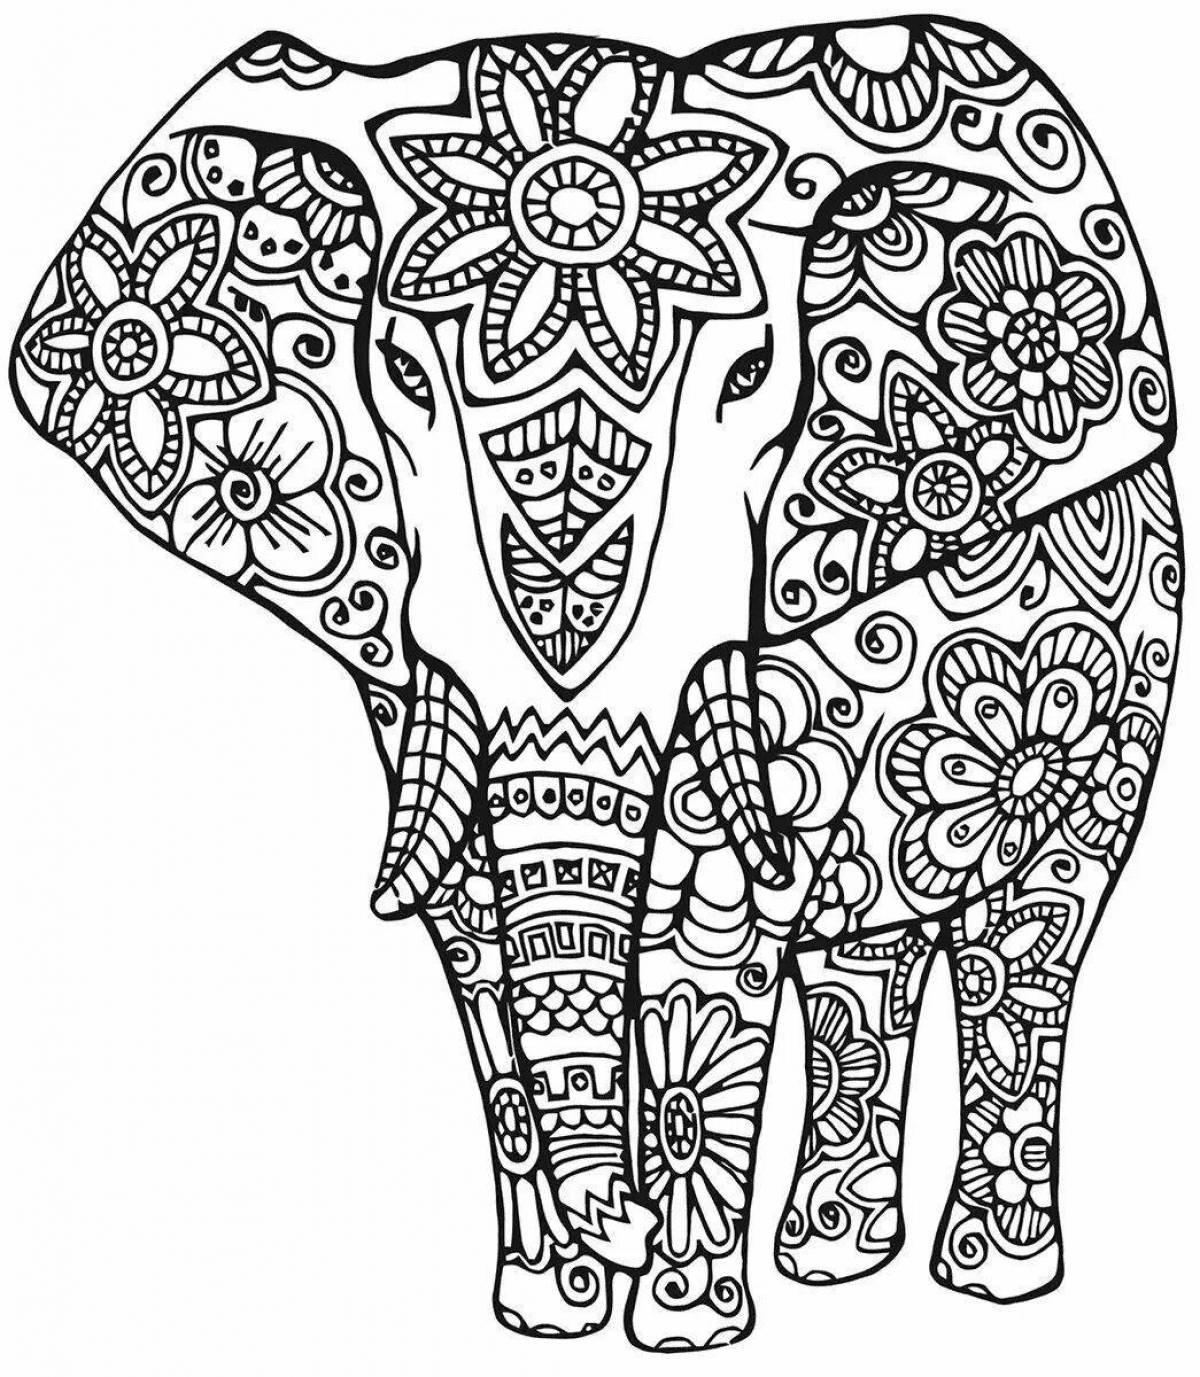 Radiant coloring page psychological for adults